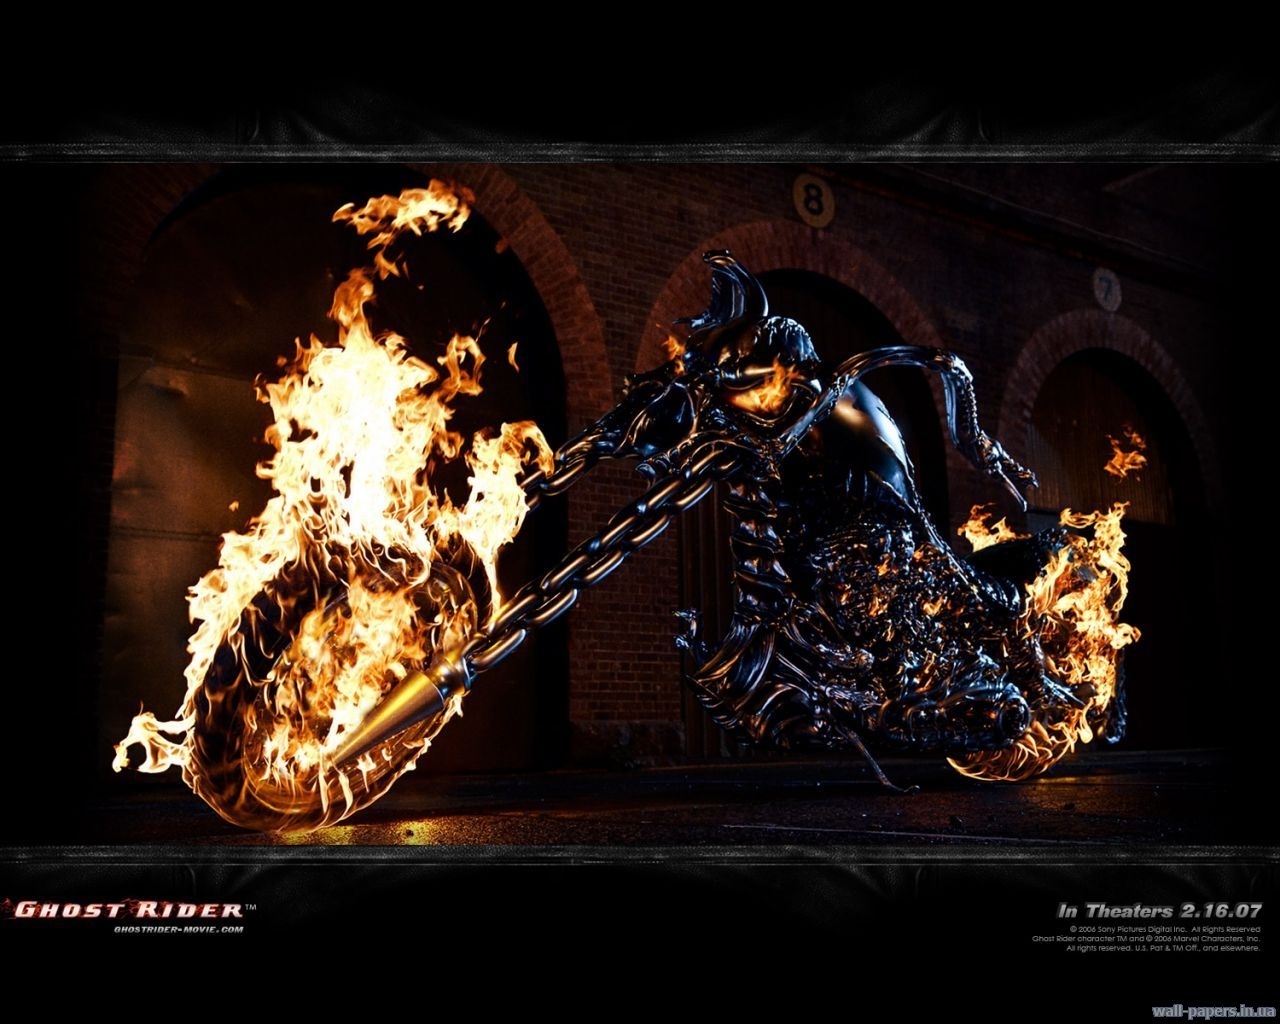 ghost rider, cinema, transport, fire, motorcycles, black High Definition image